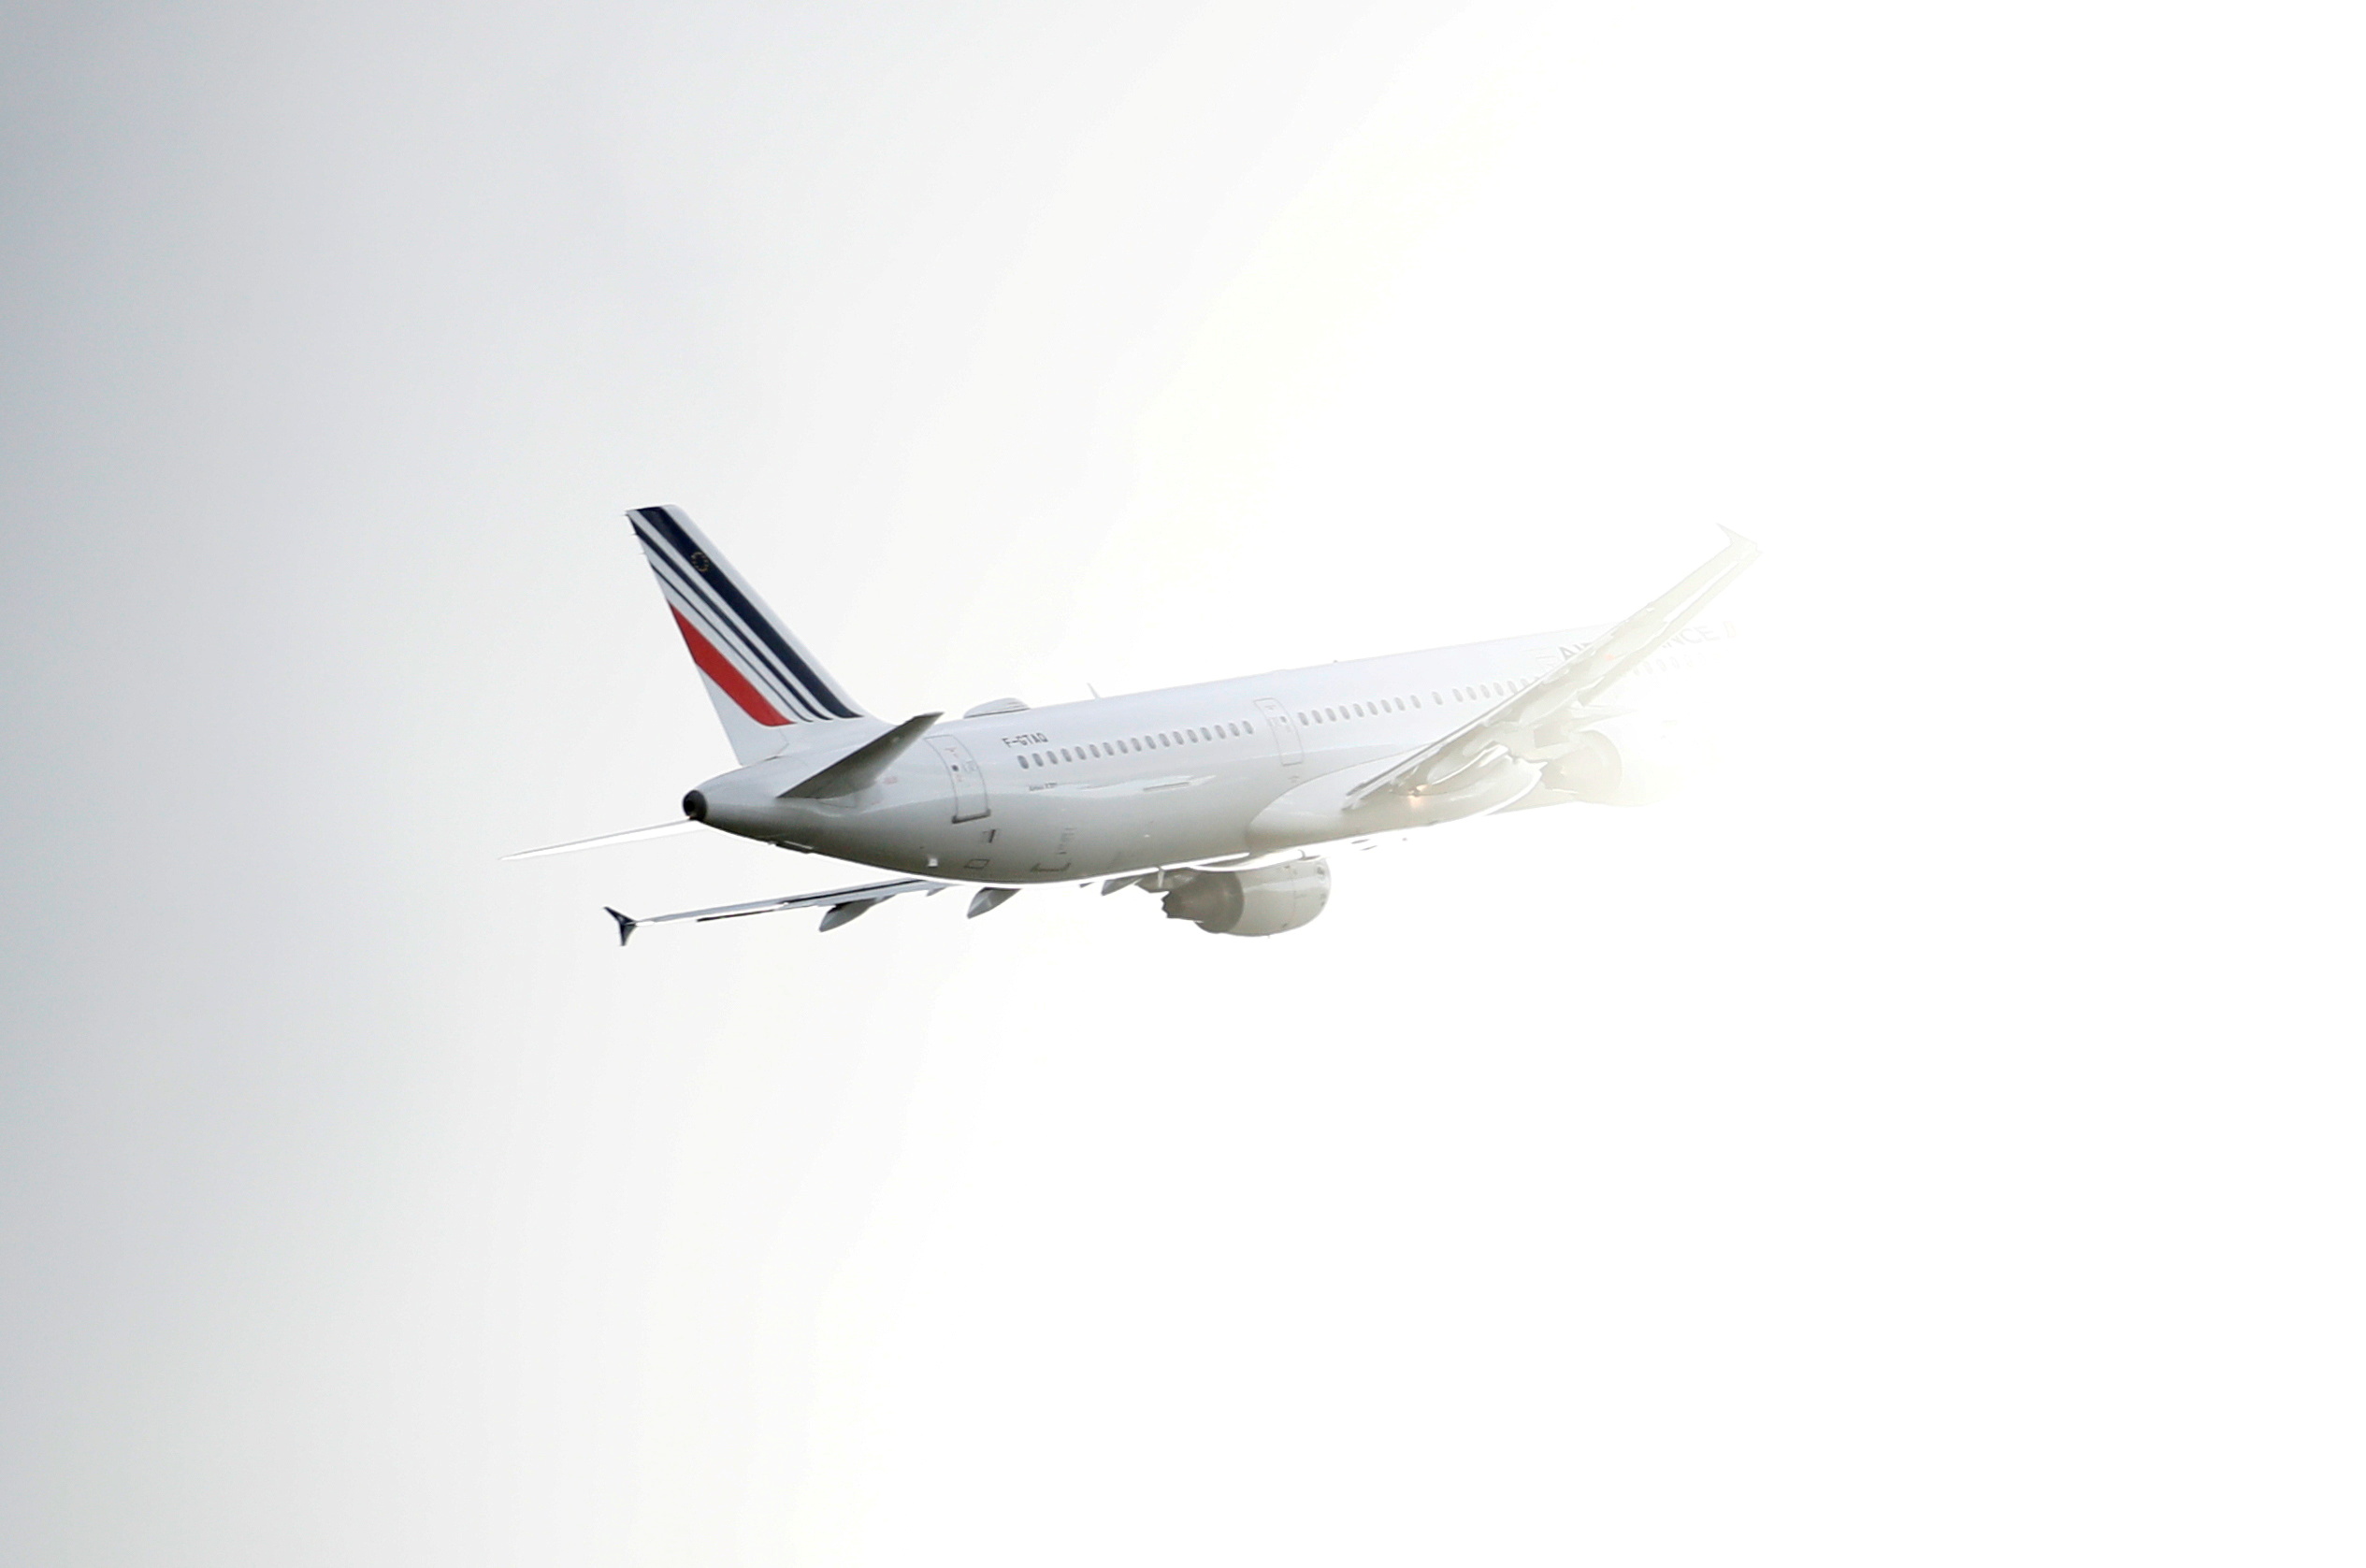 Air France expects no disruption from June 25 pilot union strike | Reuters